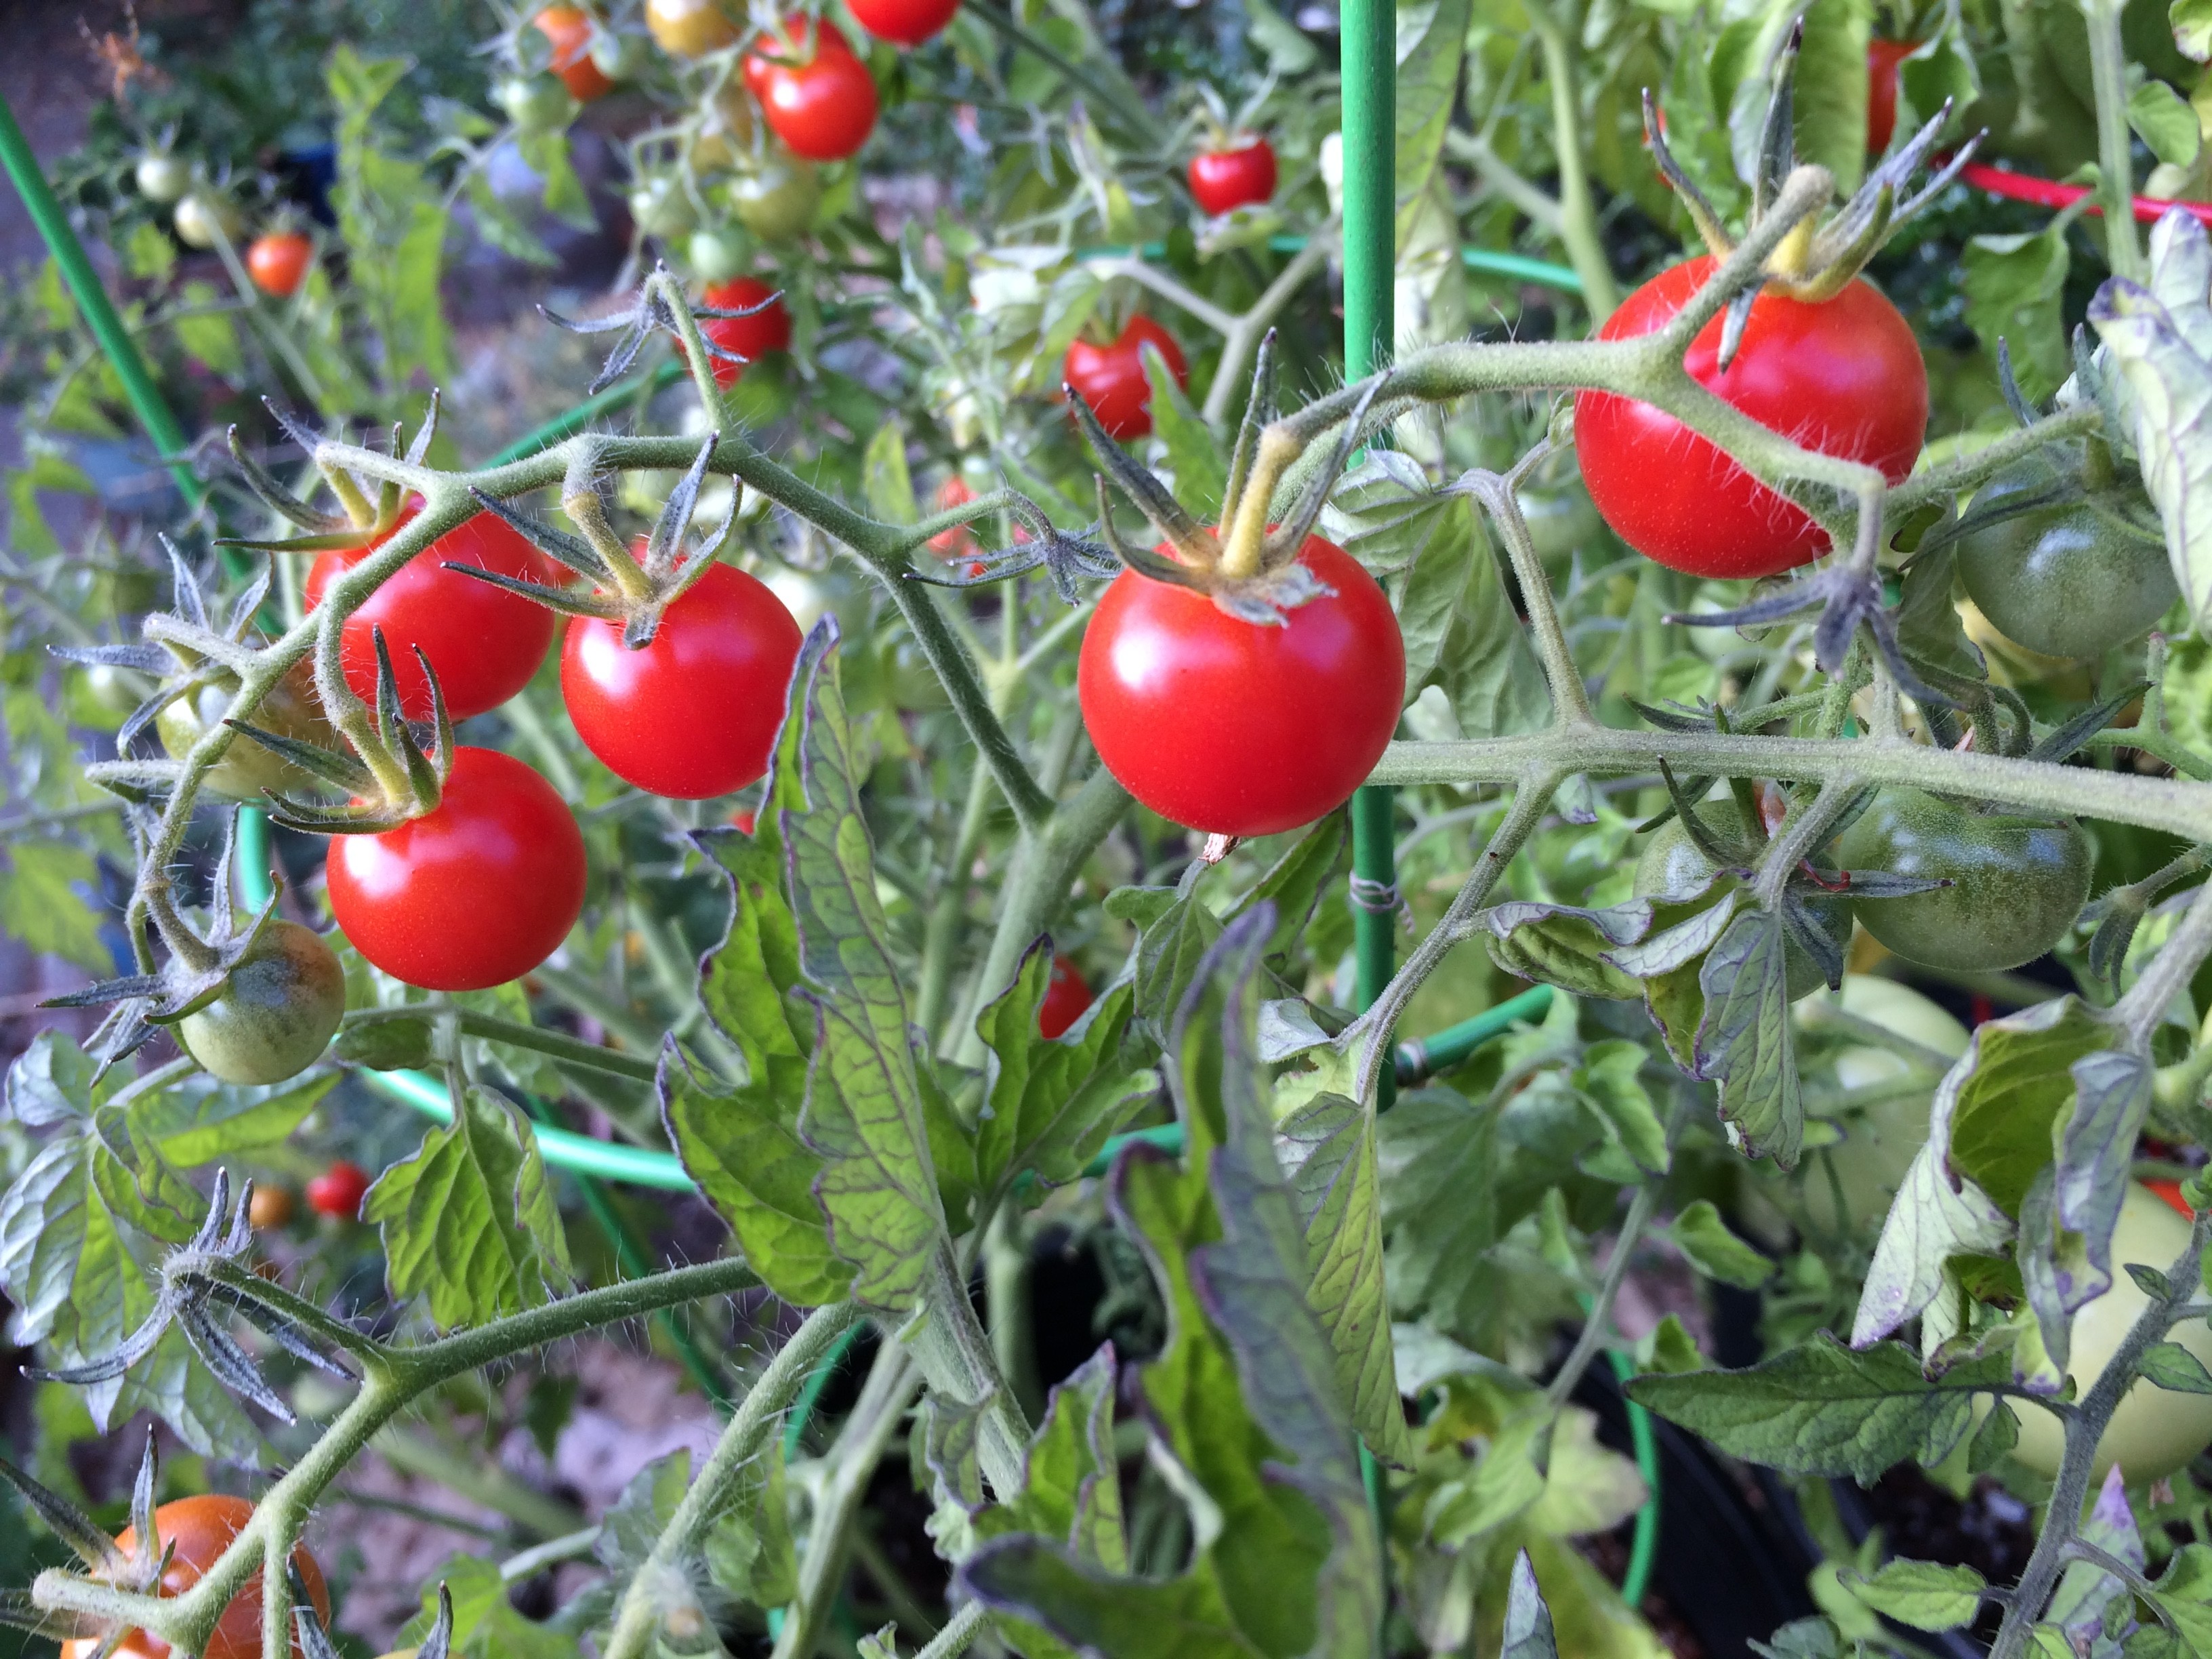 Gardeners Rejoice! New Septoria-Resistant Tomatoes Now Available